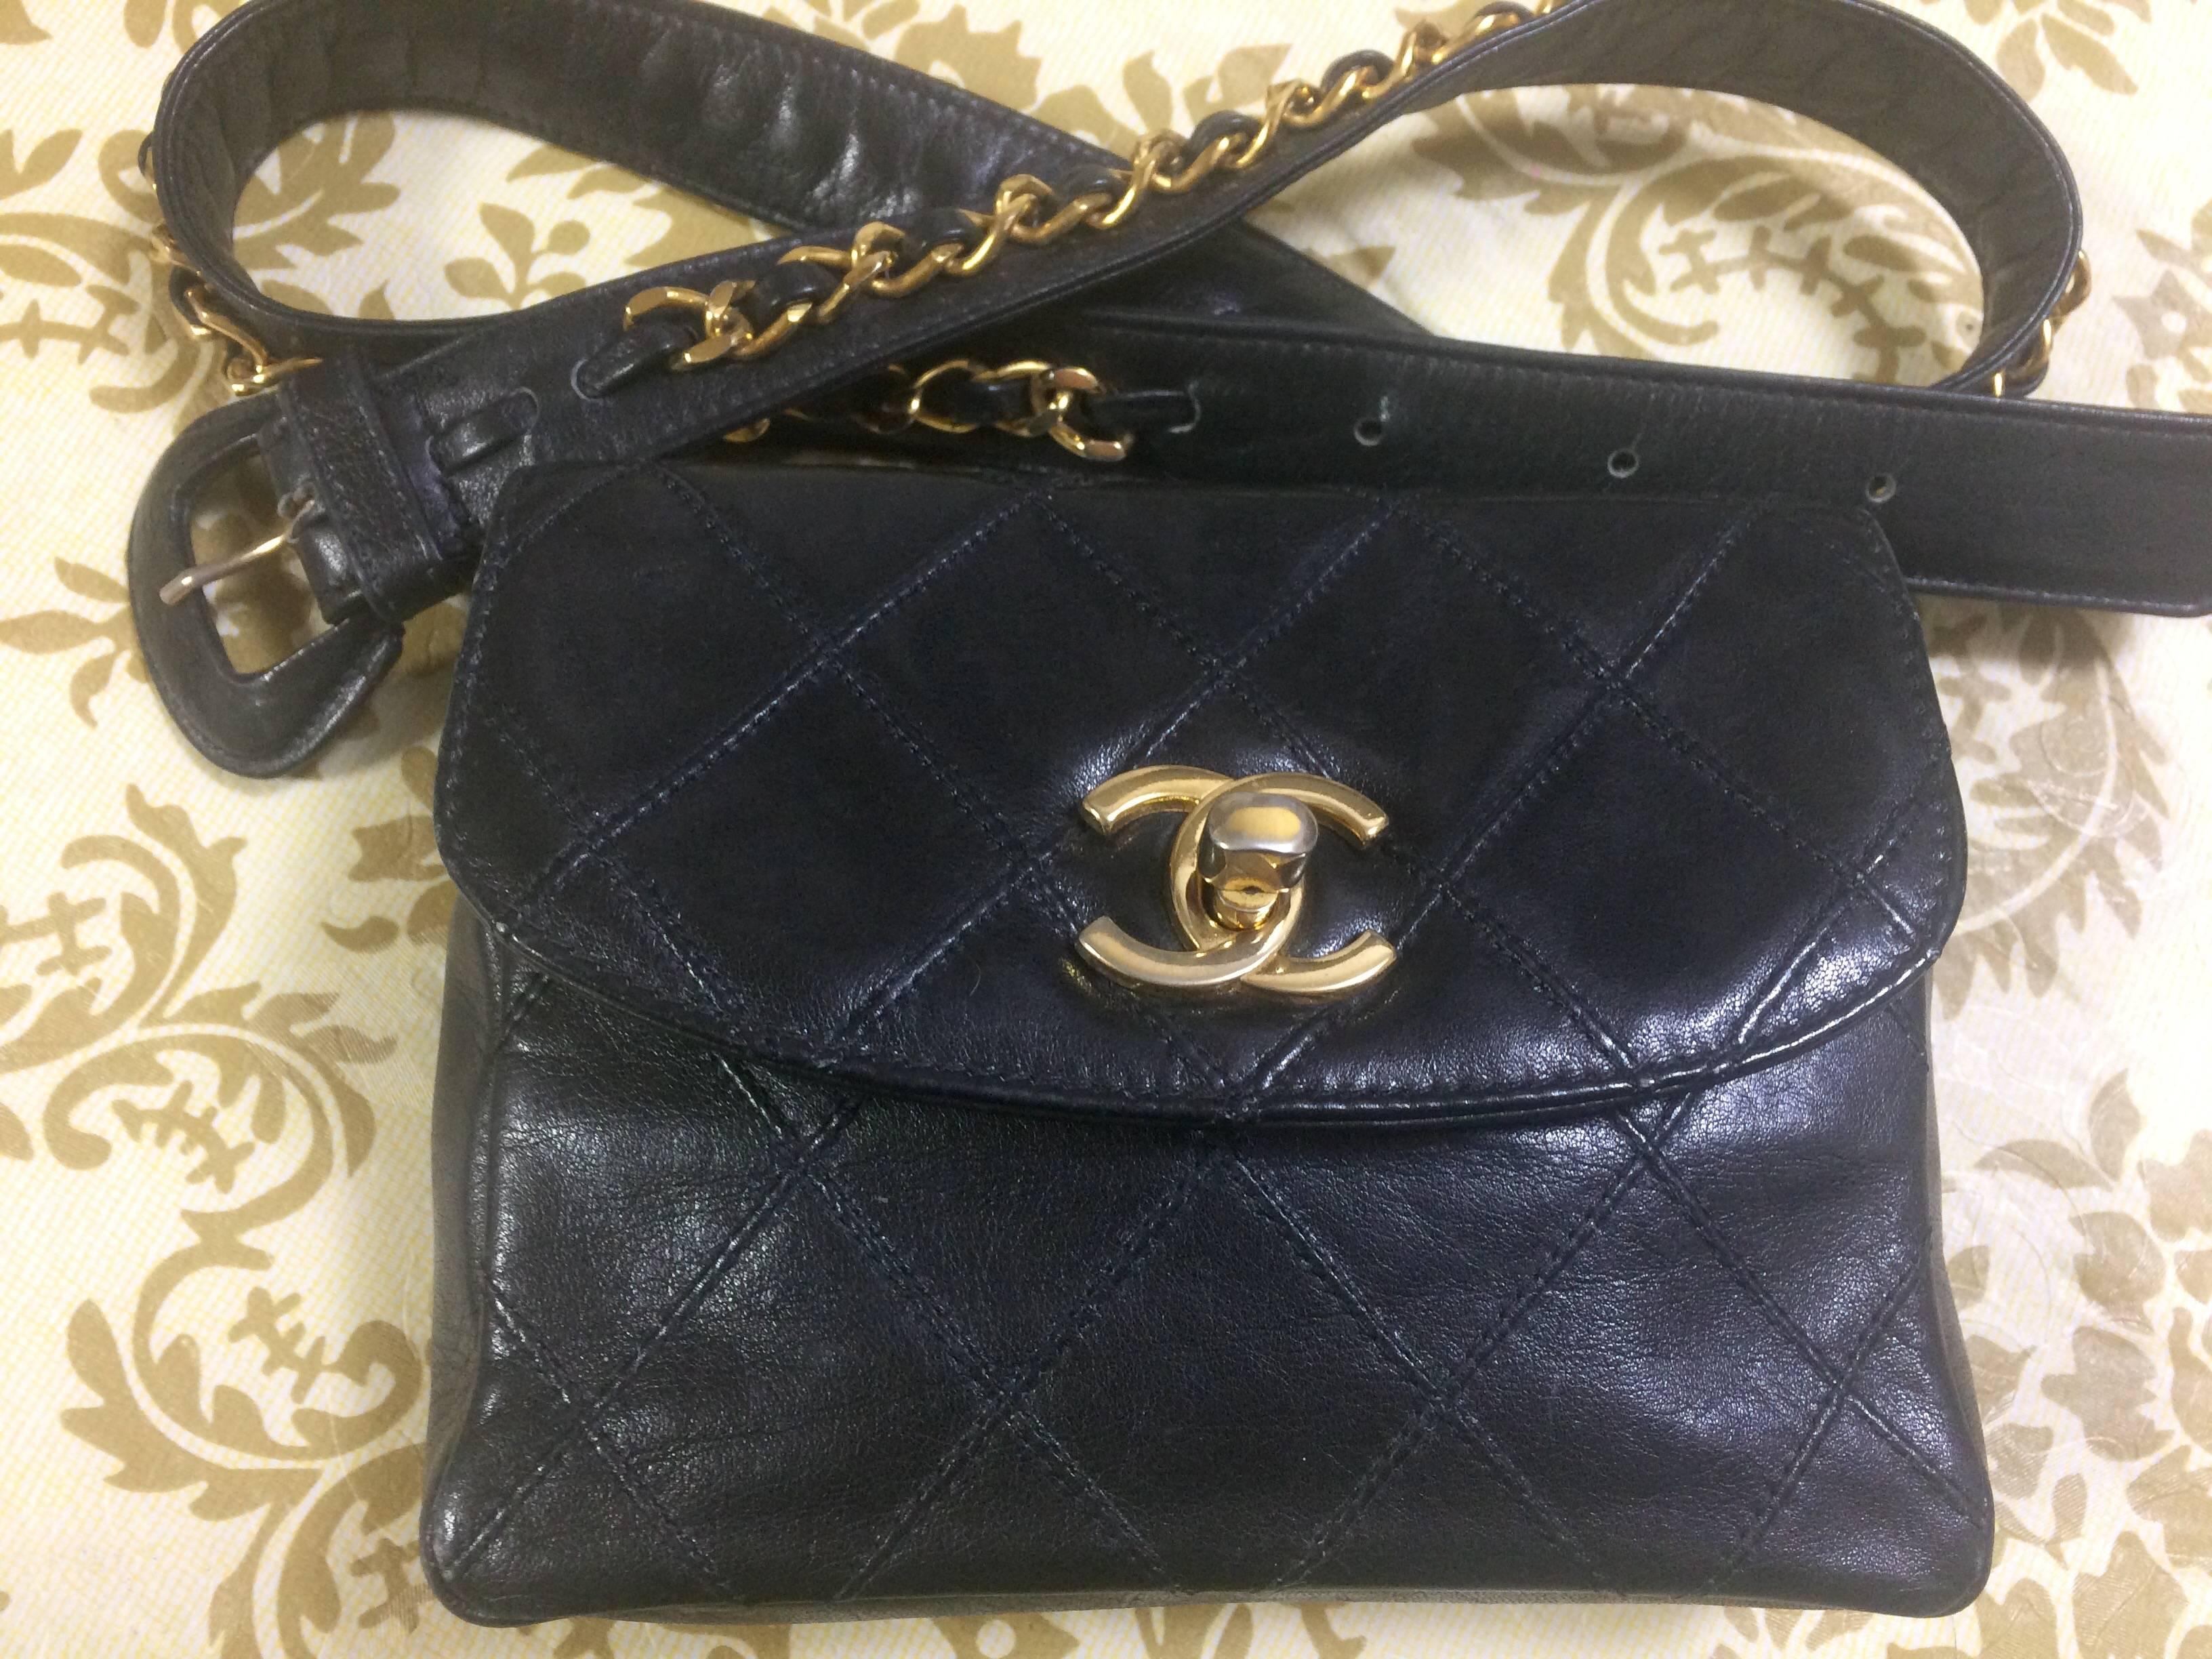 1980s. Vintage CHANEL black leather waist purse, fanny bag with golden chain belt and golden CC closure hock. 26